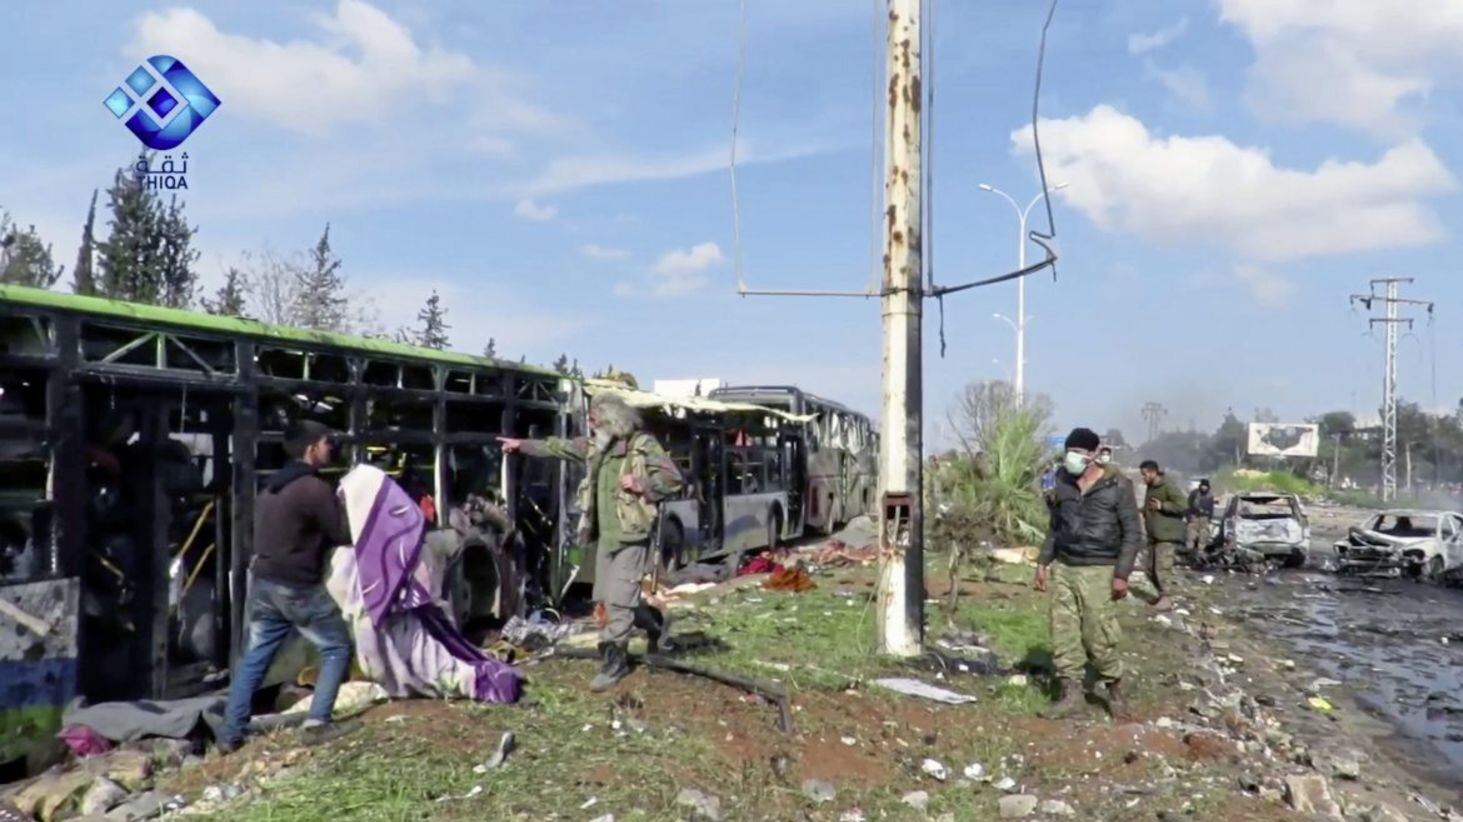 Rebel gunmen at the site of a blast that damaged several buses carrying evacuees, at the Rashideen area, a rebel-controlled district outside Aleppo city, Syria Picture: Thiqa News via AP 